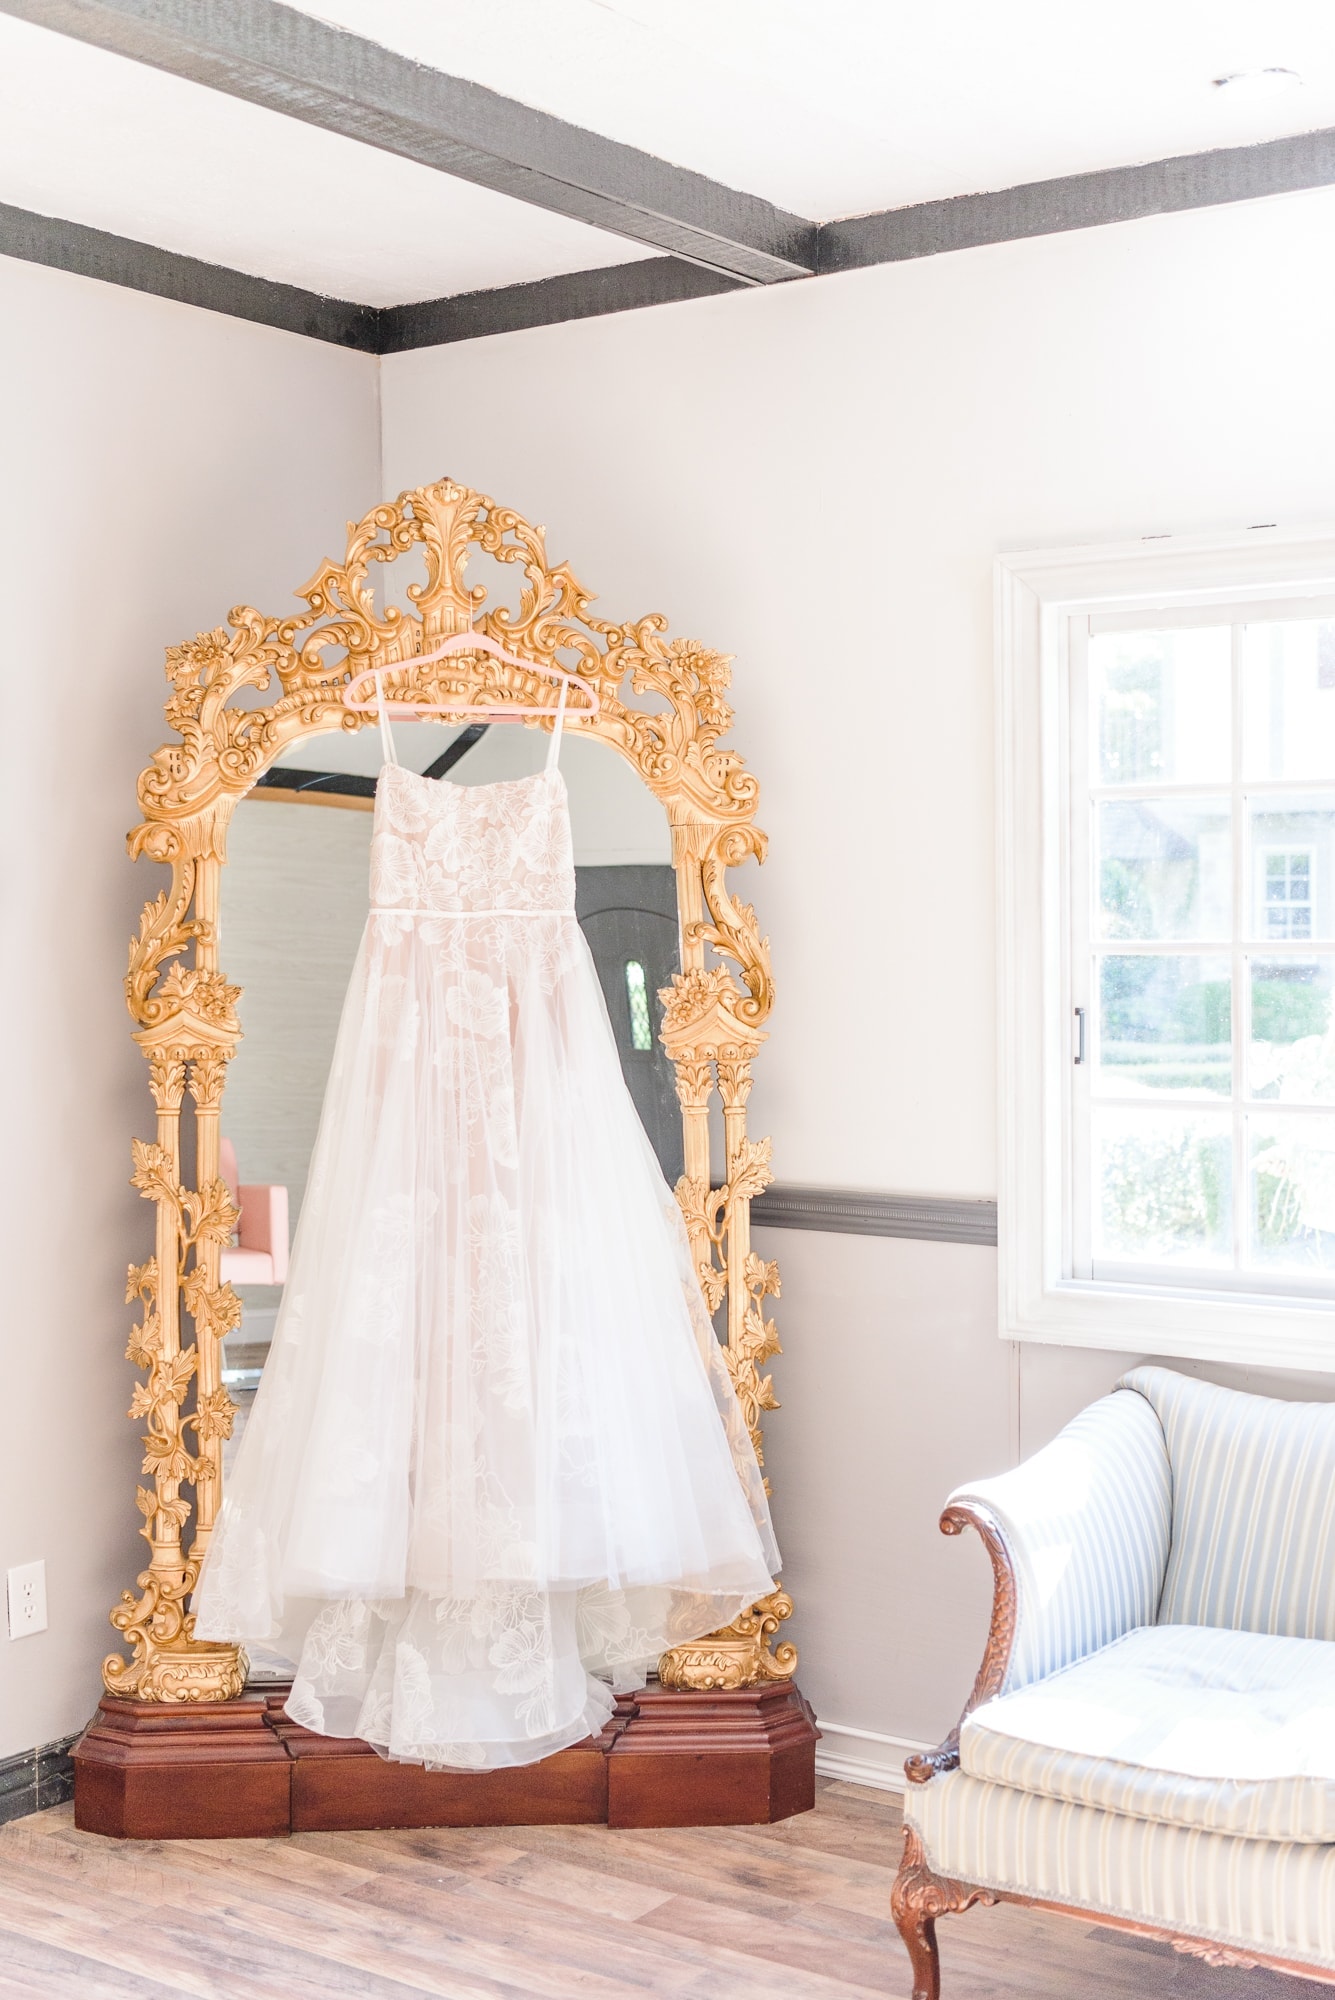 The wedding dress is hung on the Key Rose Estate's ornate gold mirror in the bride's room.